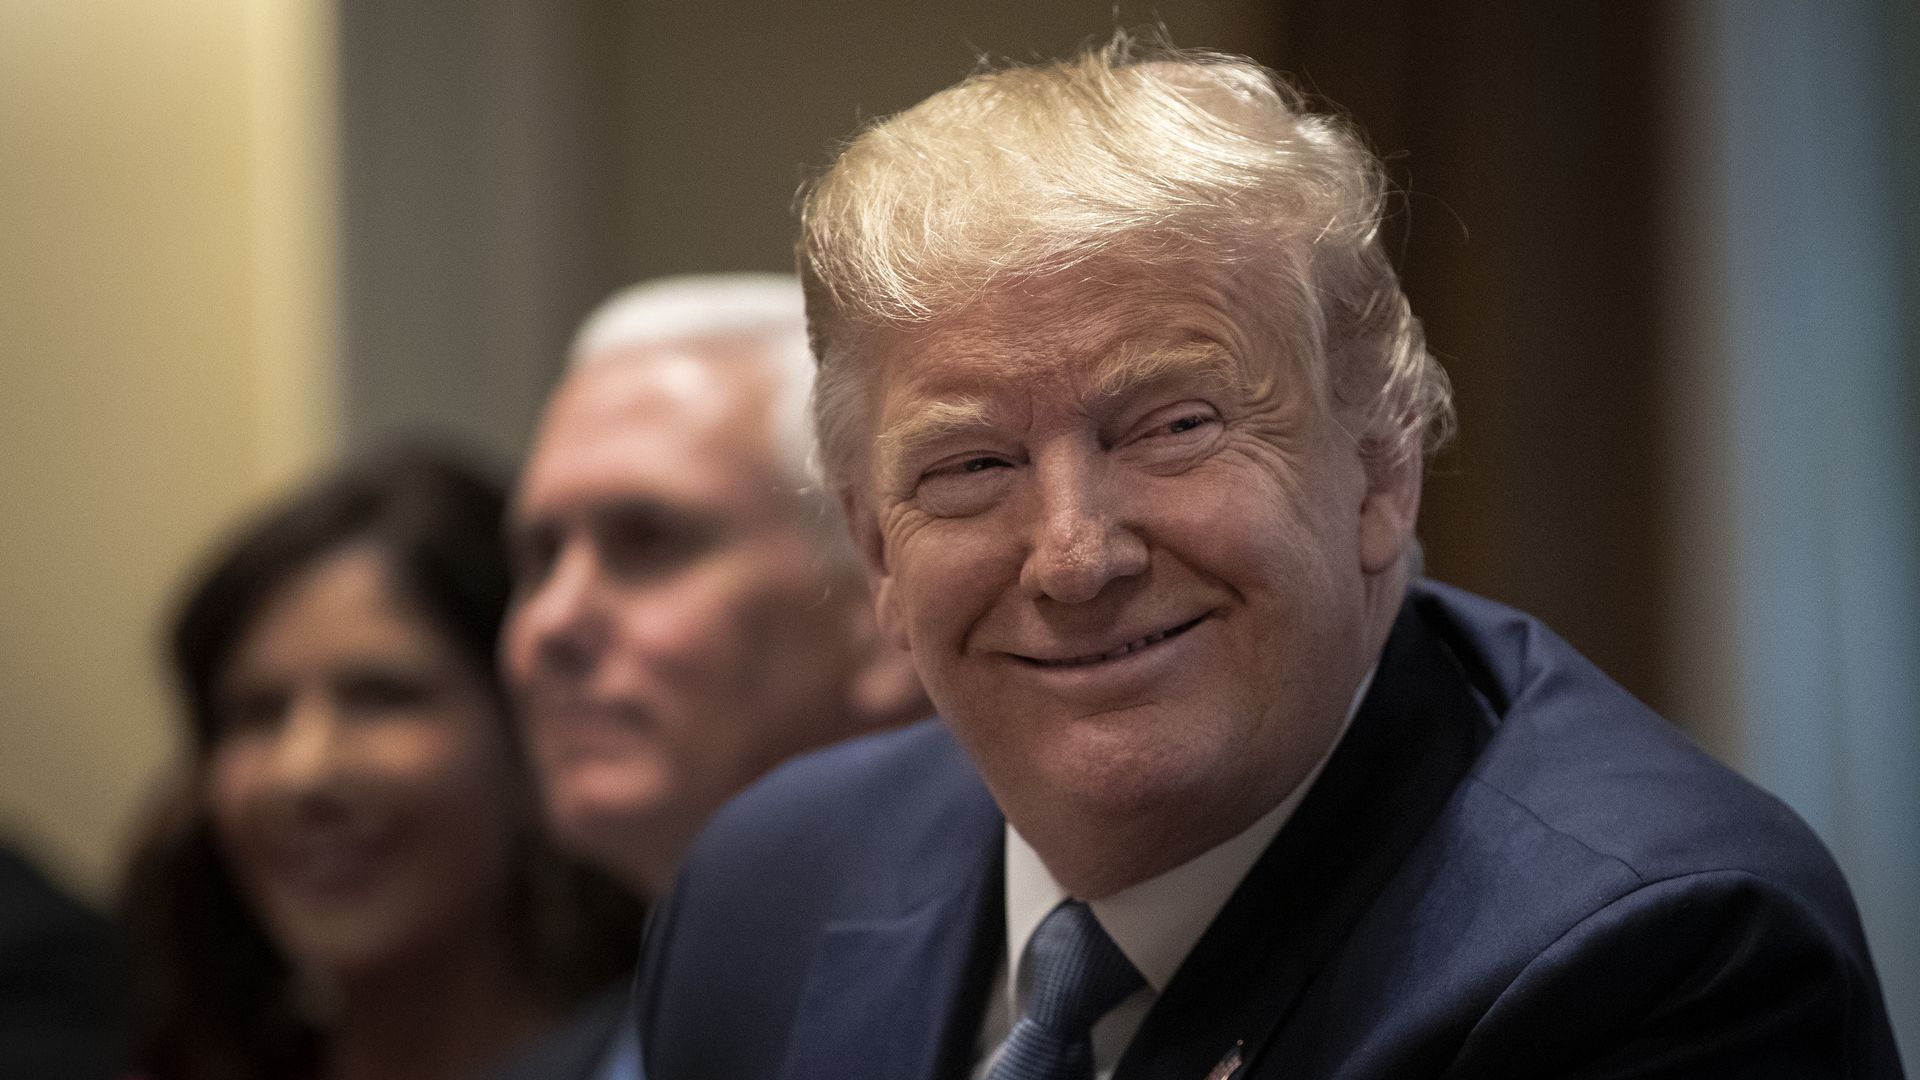  President Donald Trump listens during a meeting on December 16, 2019 in Washington, DC.